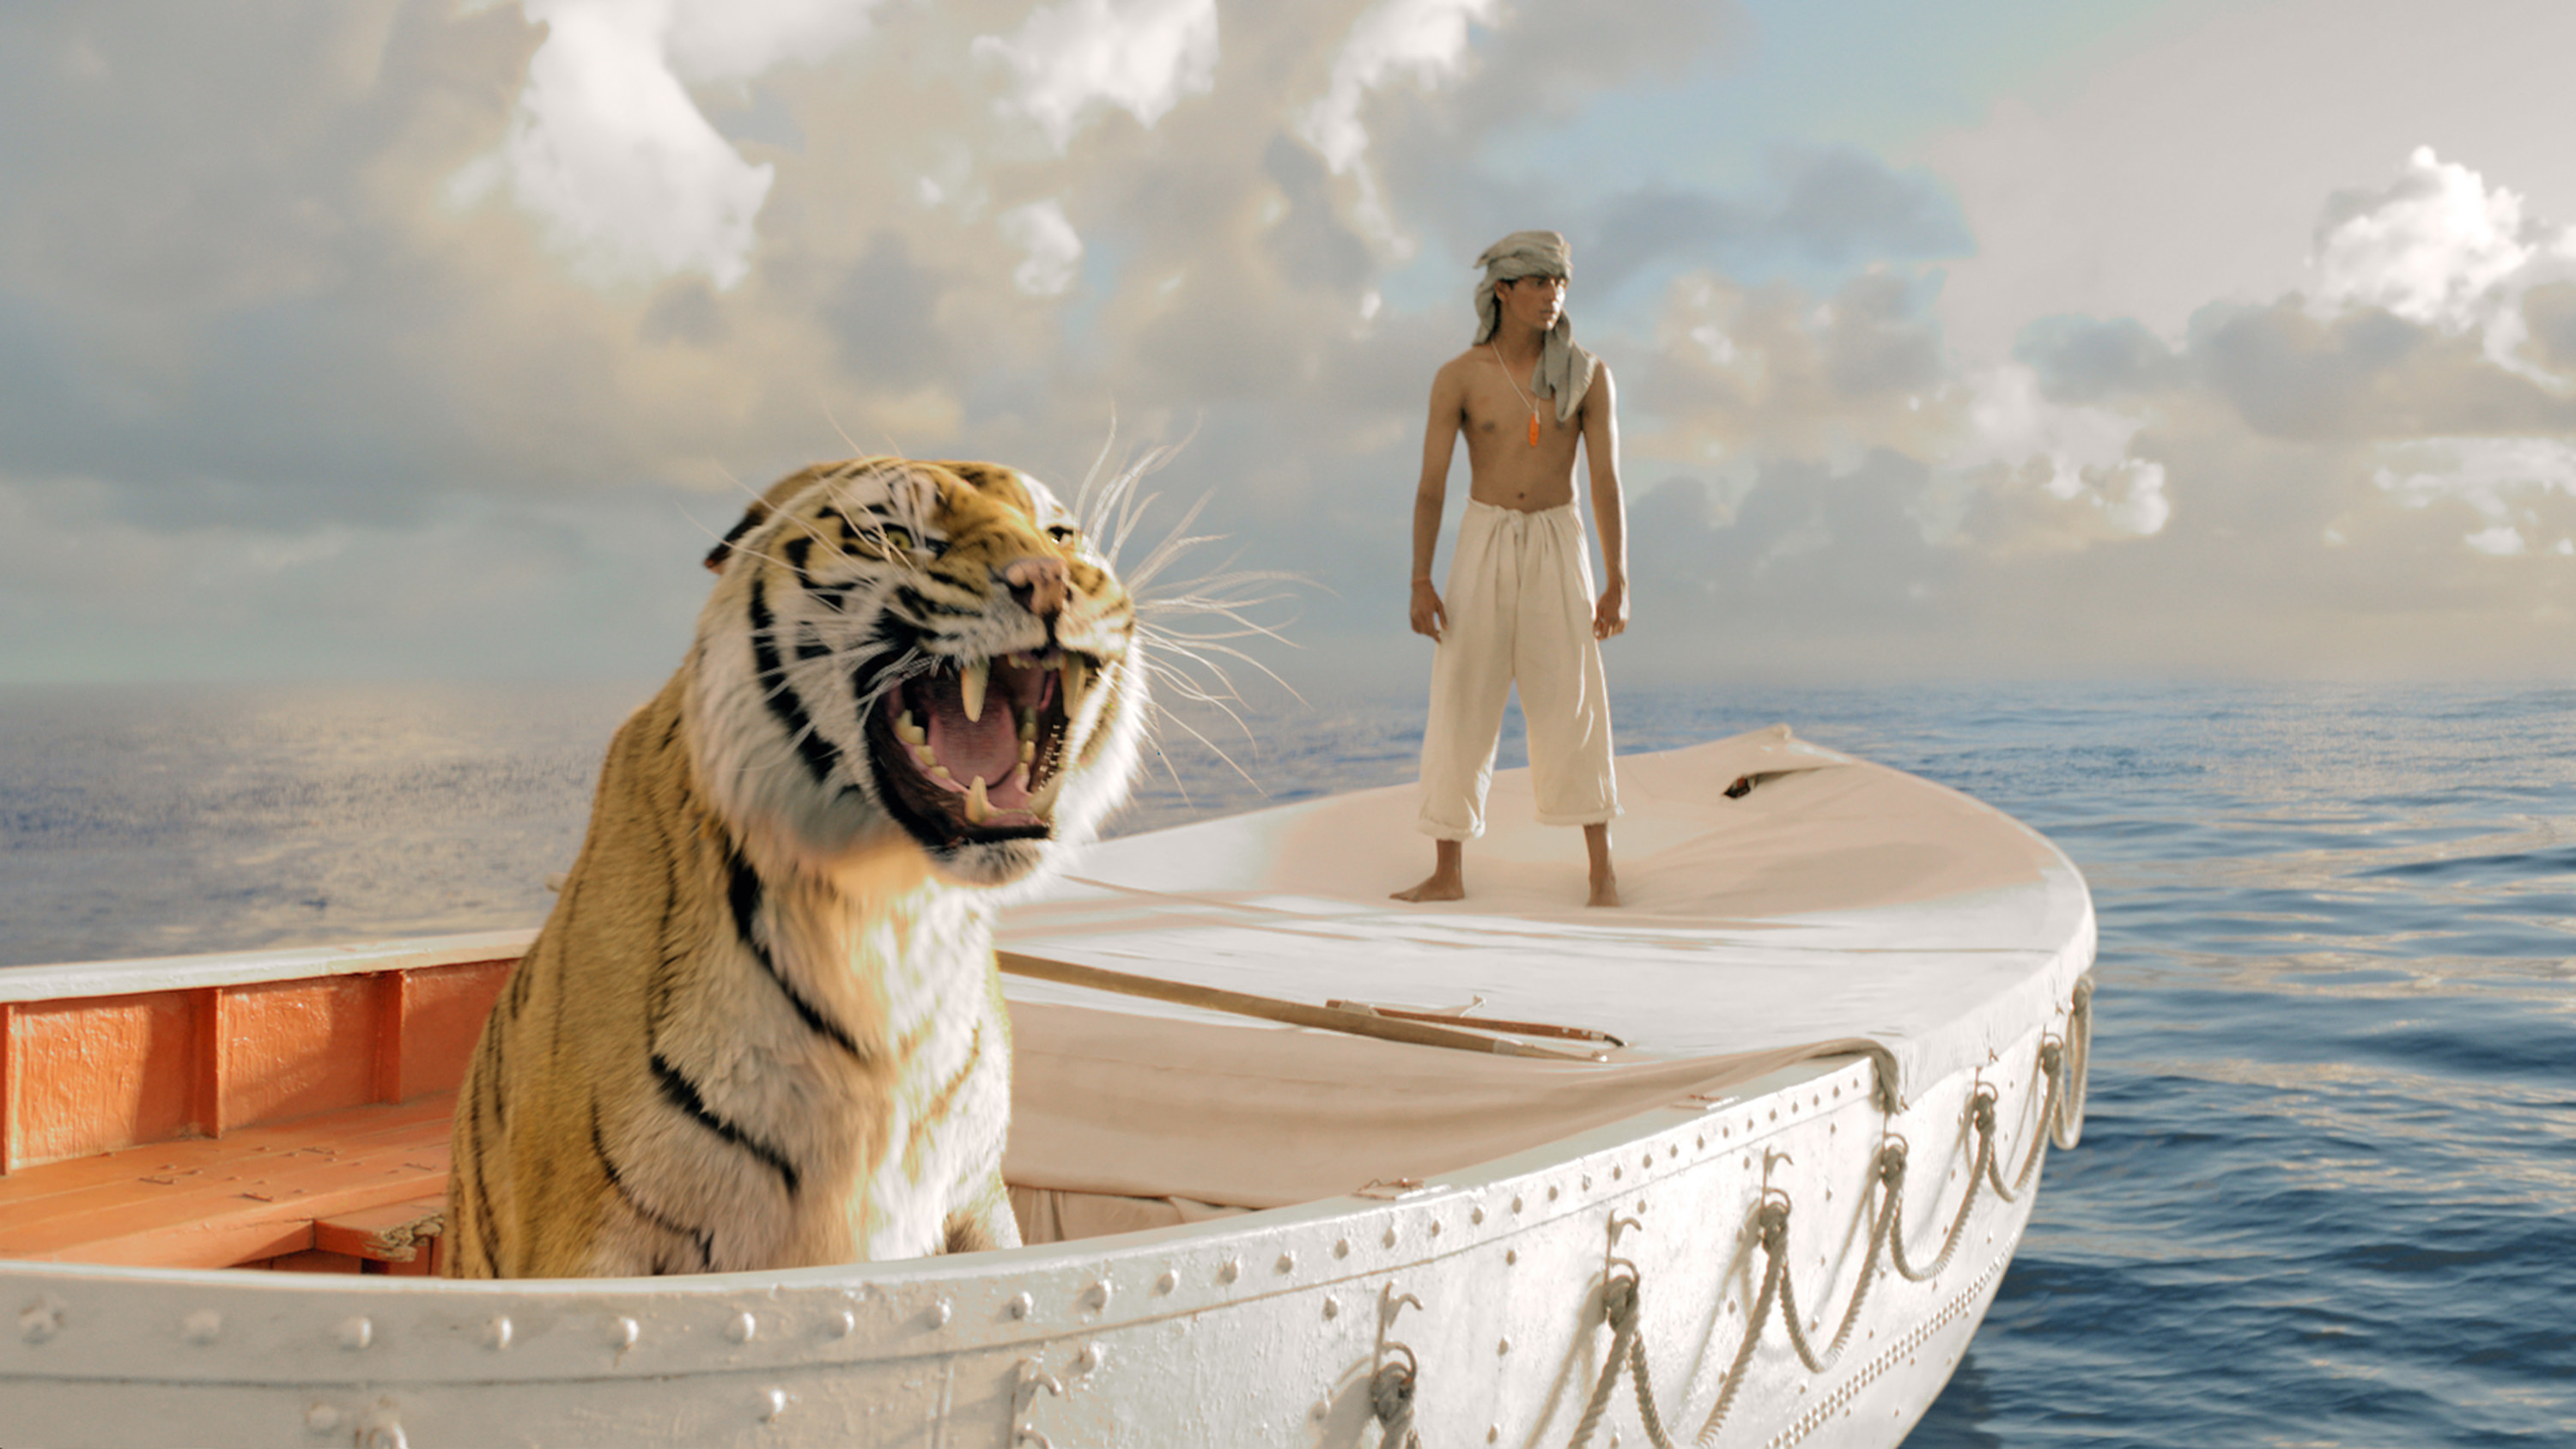 a serene shot of a tiger on a large canoe-like boat with a man standing toward the back with his shirt wrapped around his head